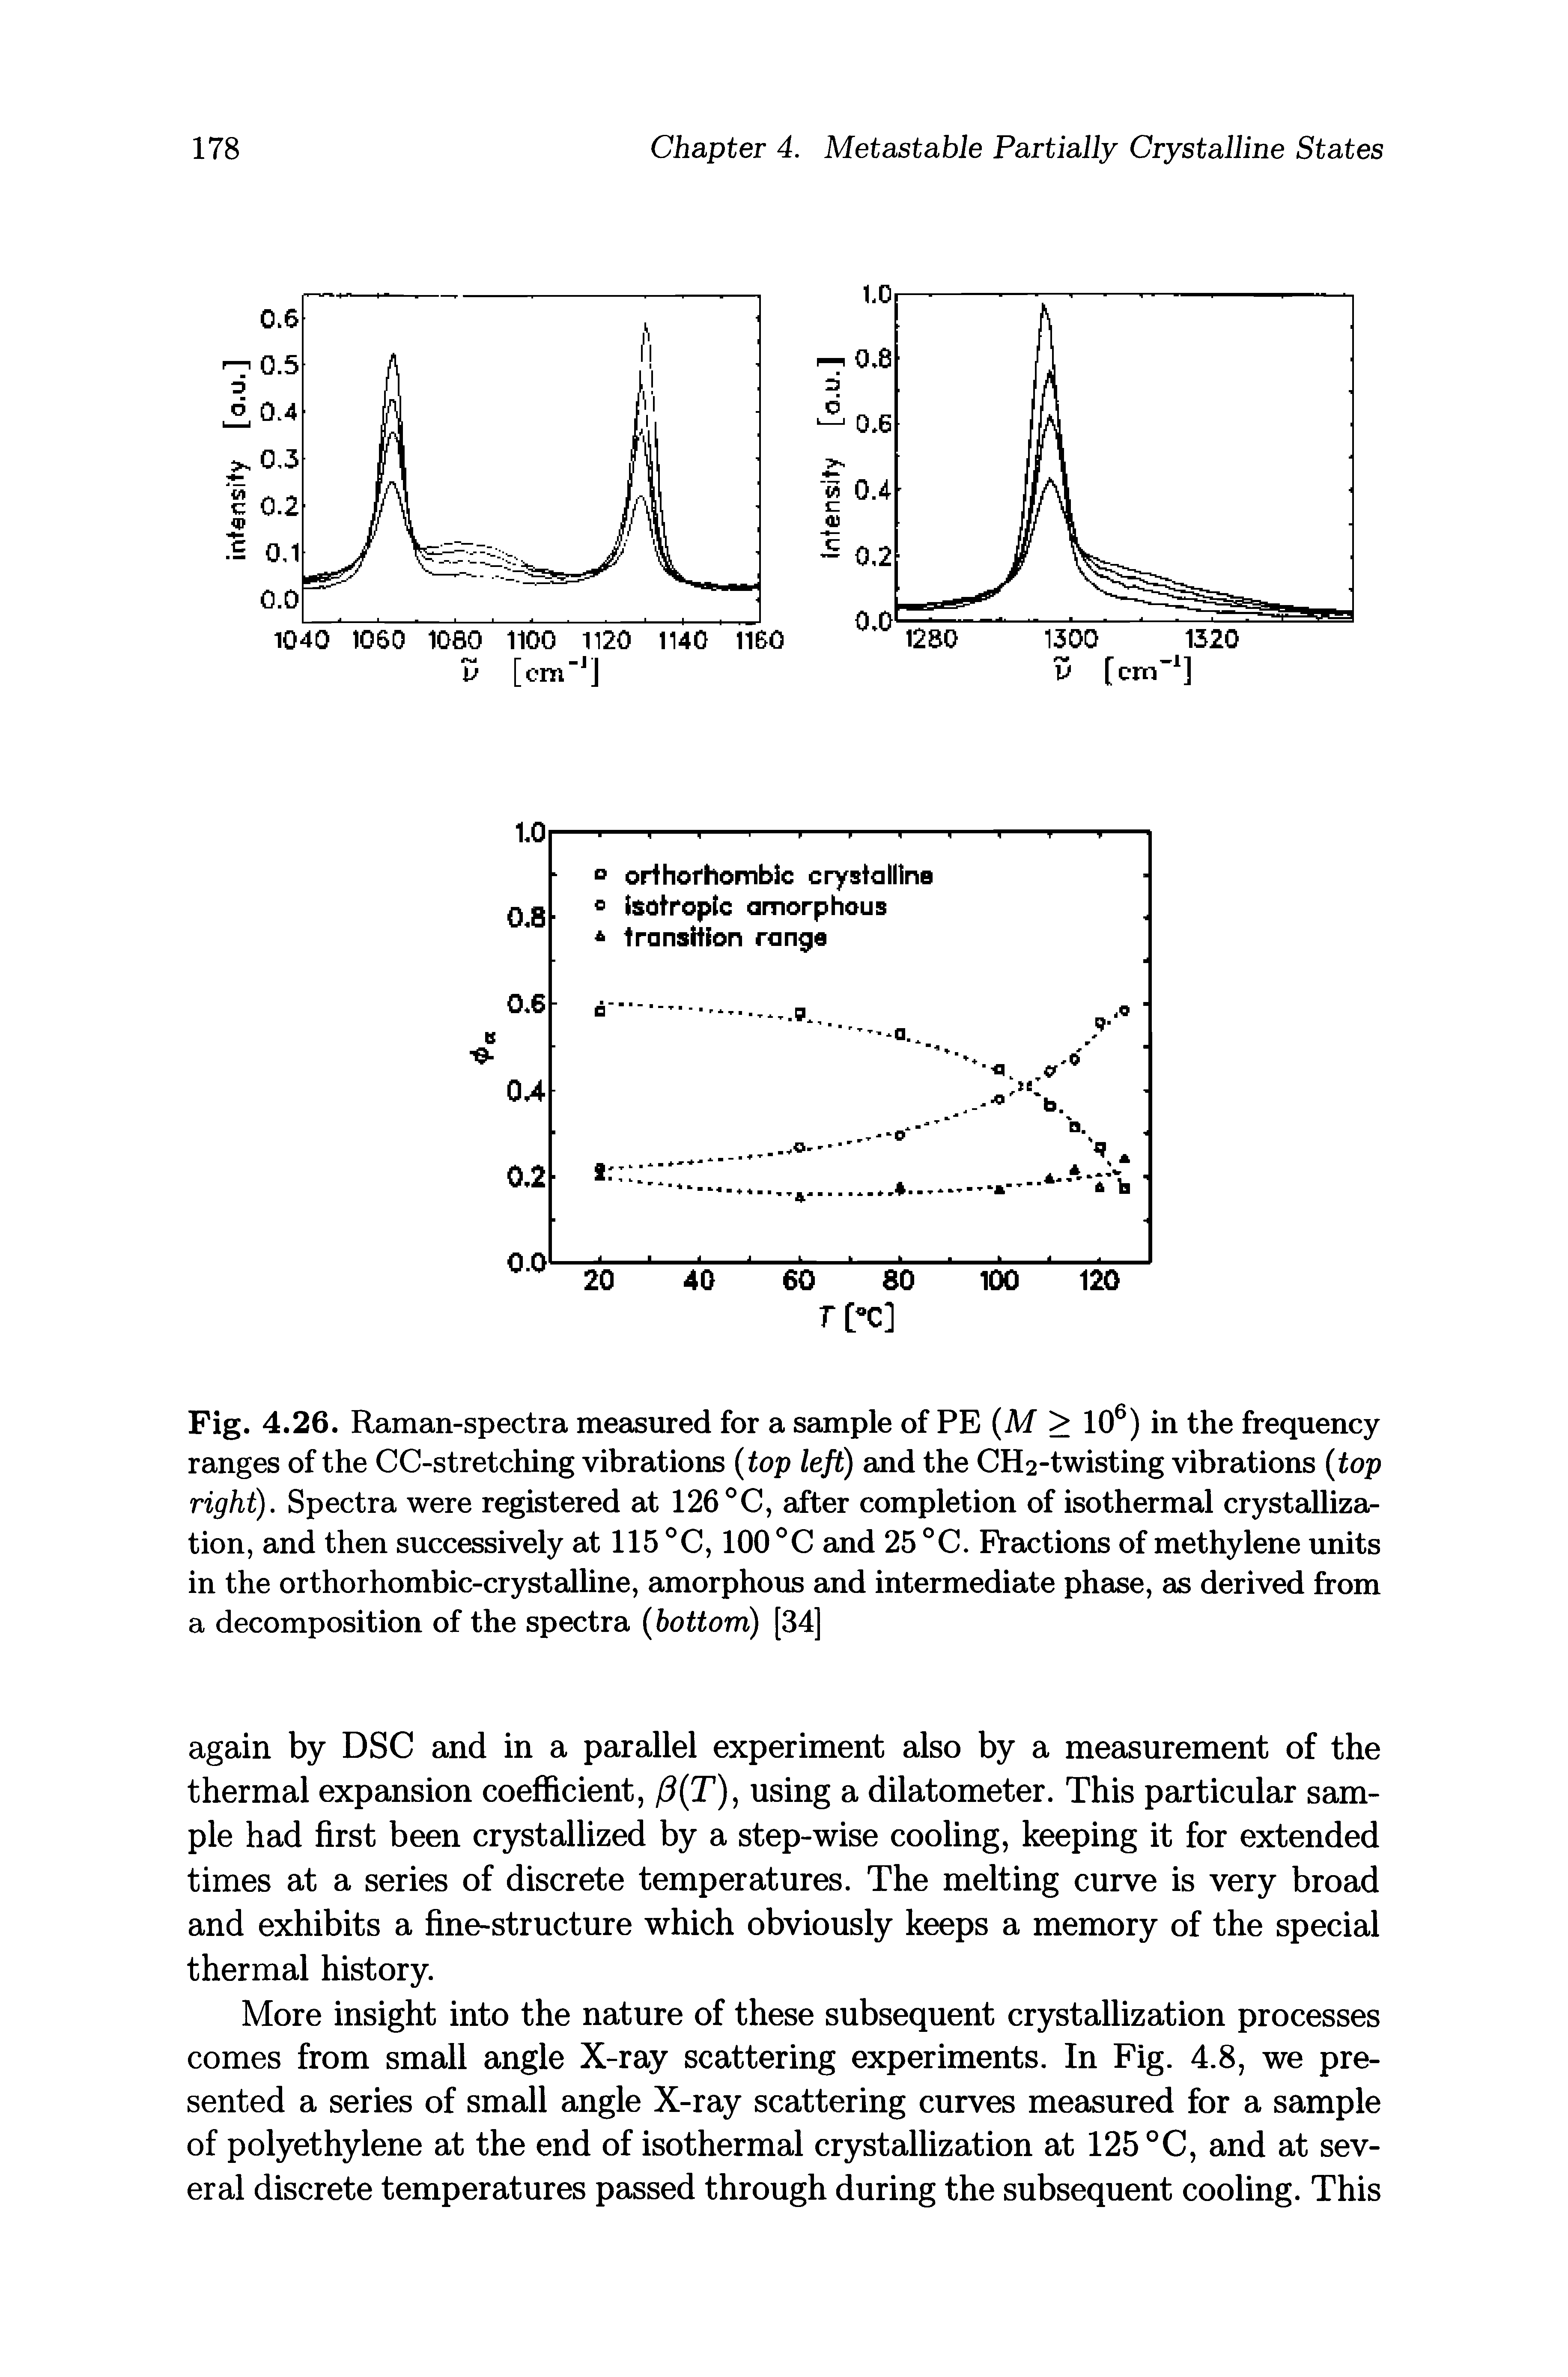 Fig. 4.26. Raman-spectra measured for a sample of PE (M > 10 ) in the frequency ranges of the CC-stretching vibrations top left) and the CH2-twisting vibrations top right). Spectra were registered at 126°C, after completion of isothermal crystallization, and then successively at 115 °C, 100 °C and 25 °C. Fractions of methylene units in the orthorhombic-crystalline, amorphous and intermediate phase, as derived from a decomposition of the spectra bottom) [34]...